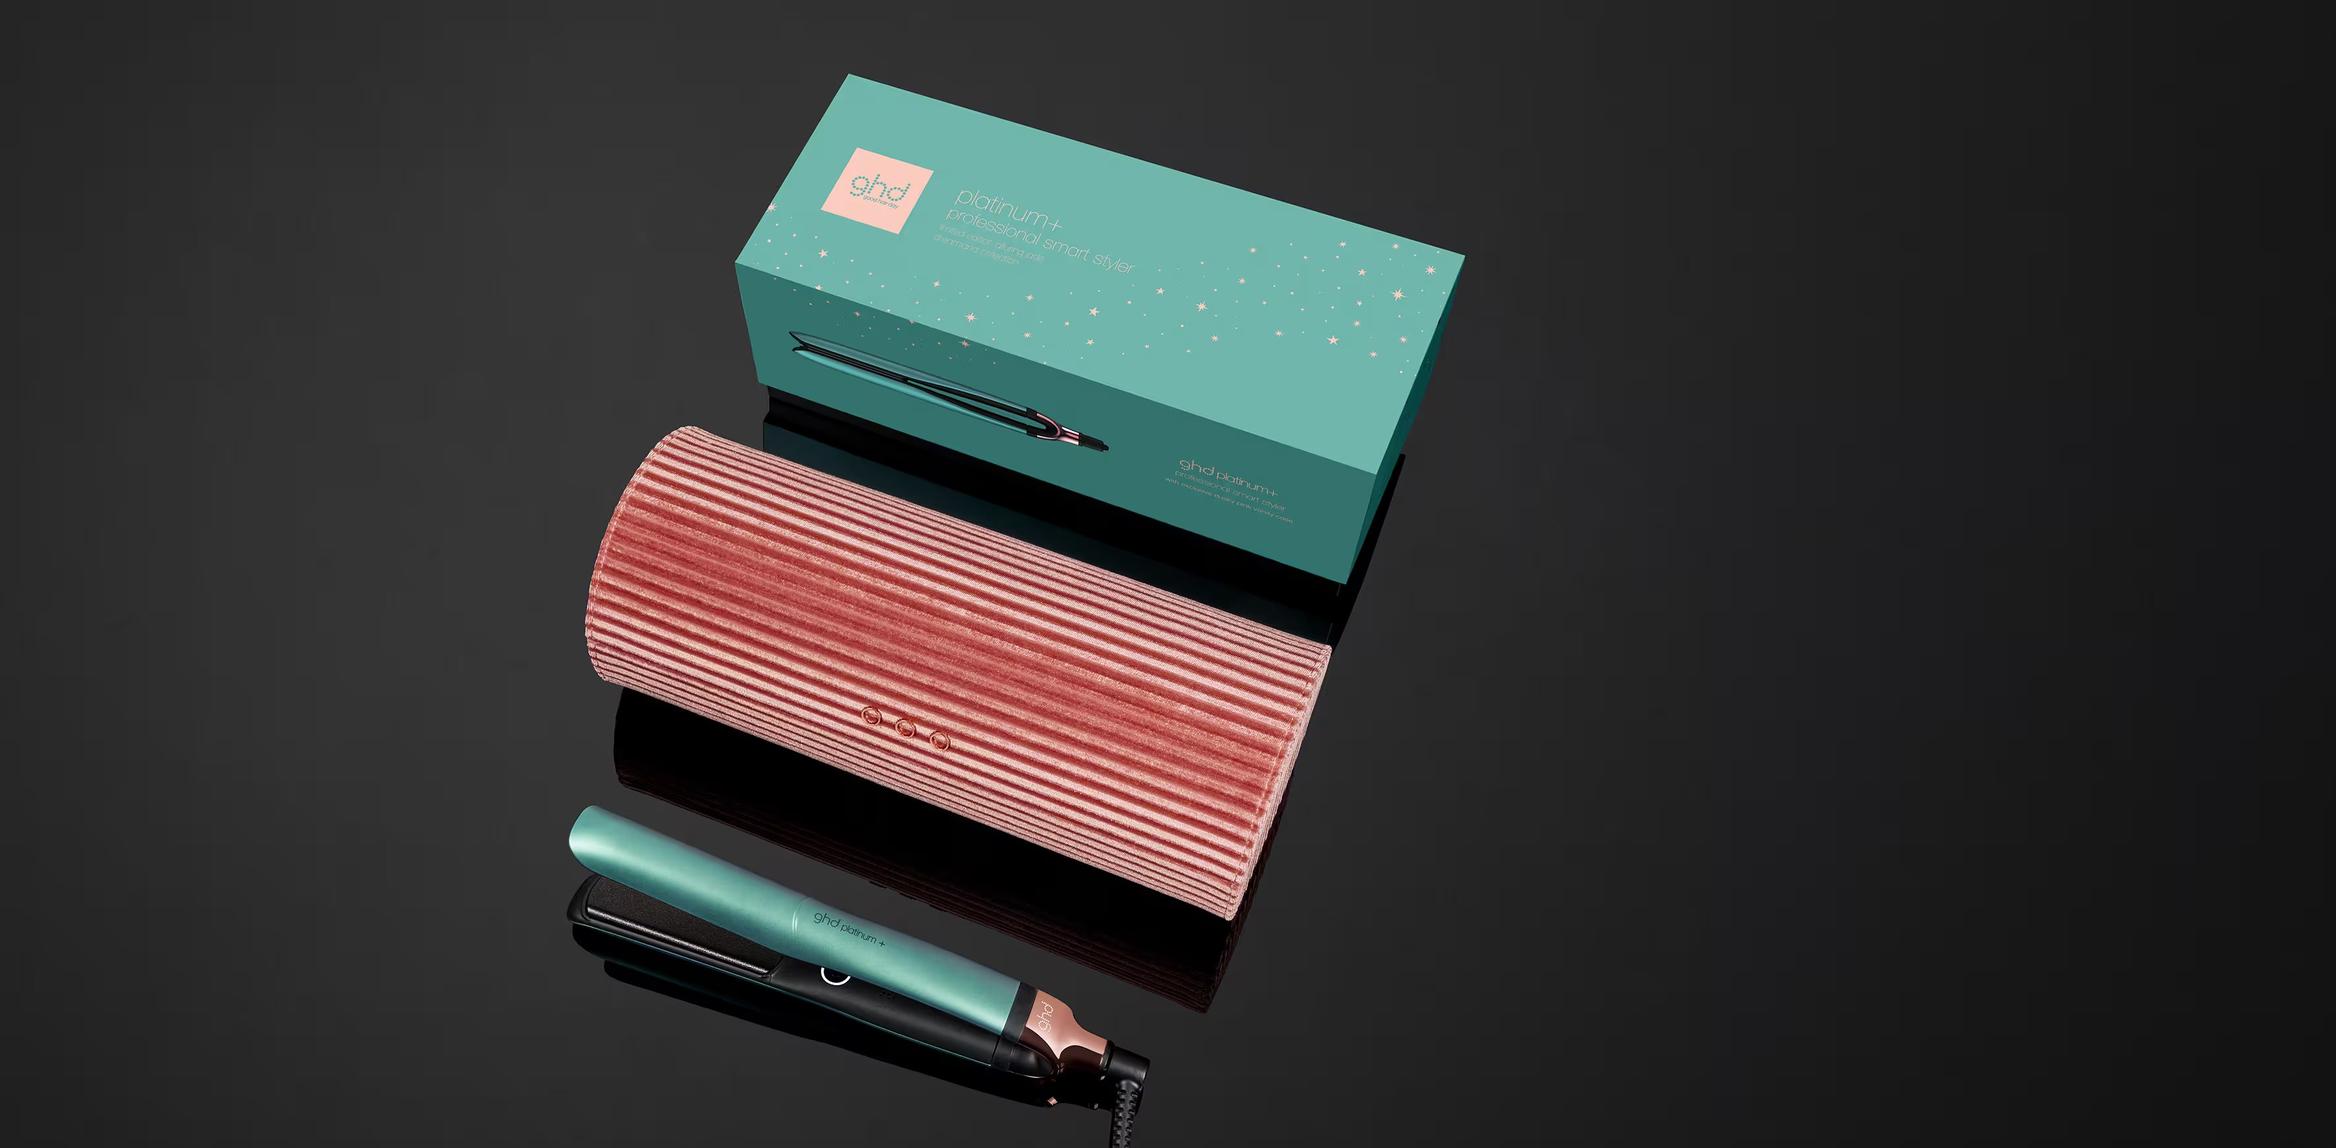 GHD PLATINUM+ HAIR STRAIGHTENER IN ALLURING JADE offers at $324 in ghd